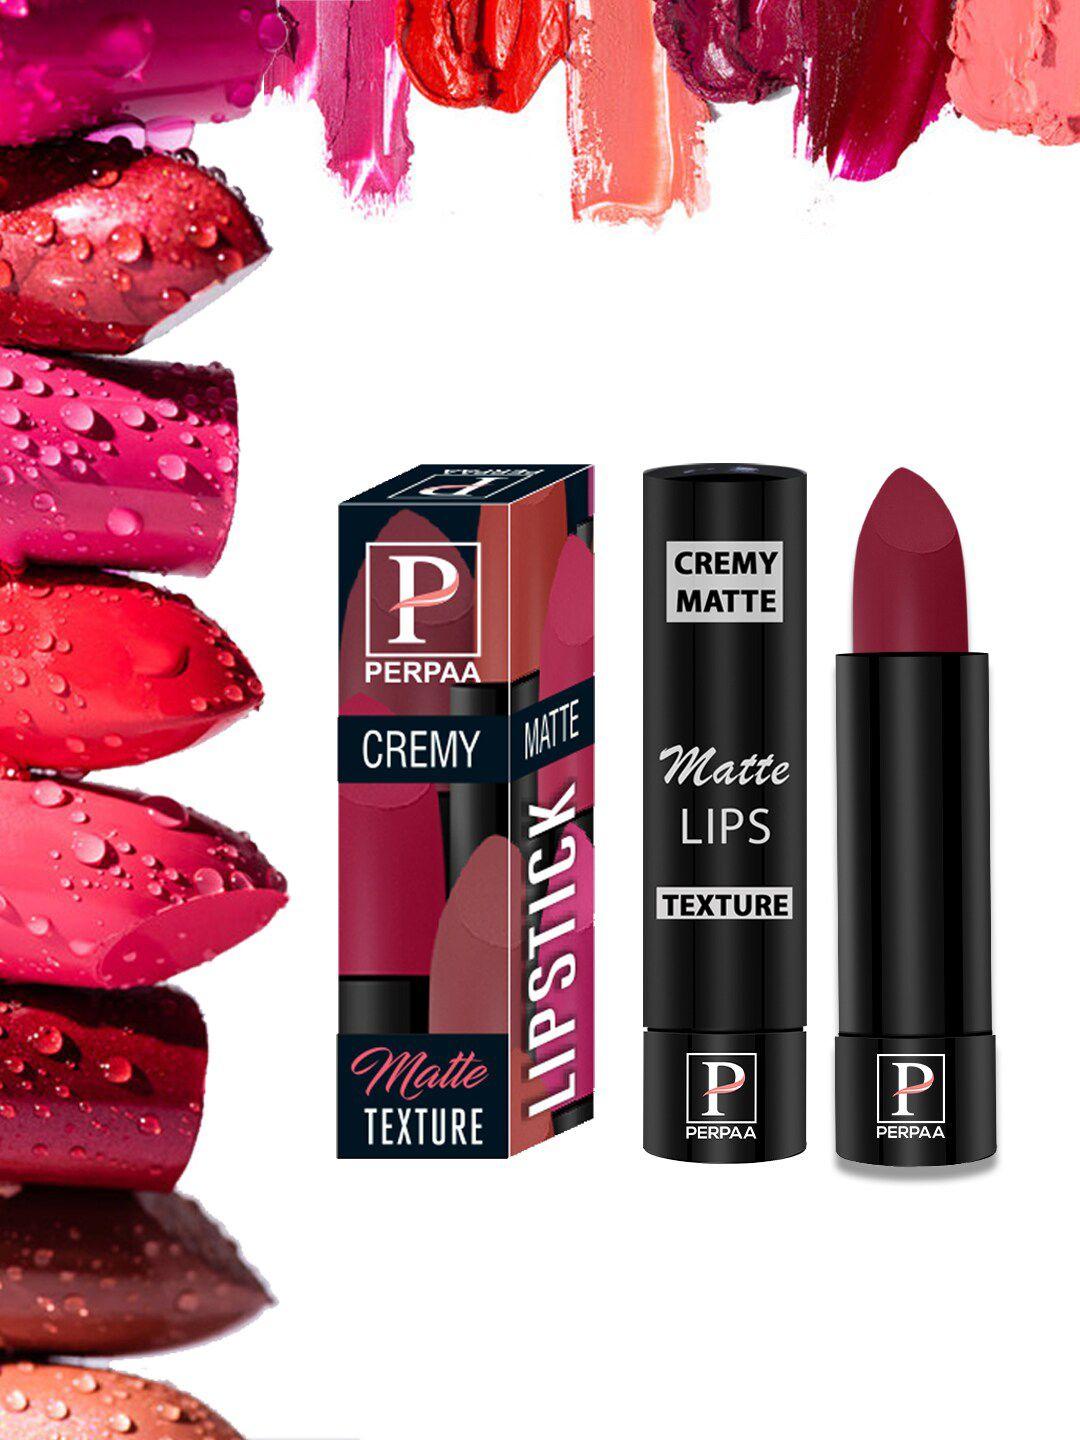 perpaa cremy long lasting matte texture bullet lipstick 3.5 g - candy pink 87